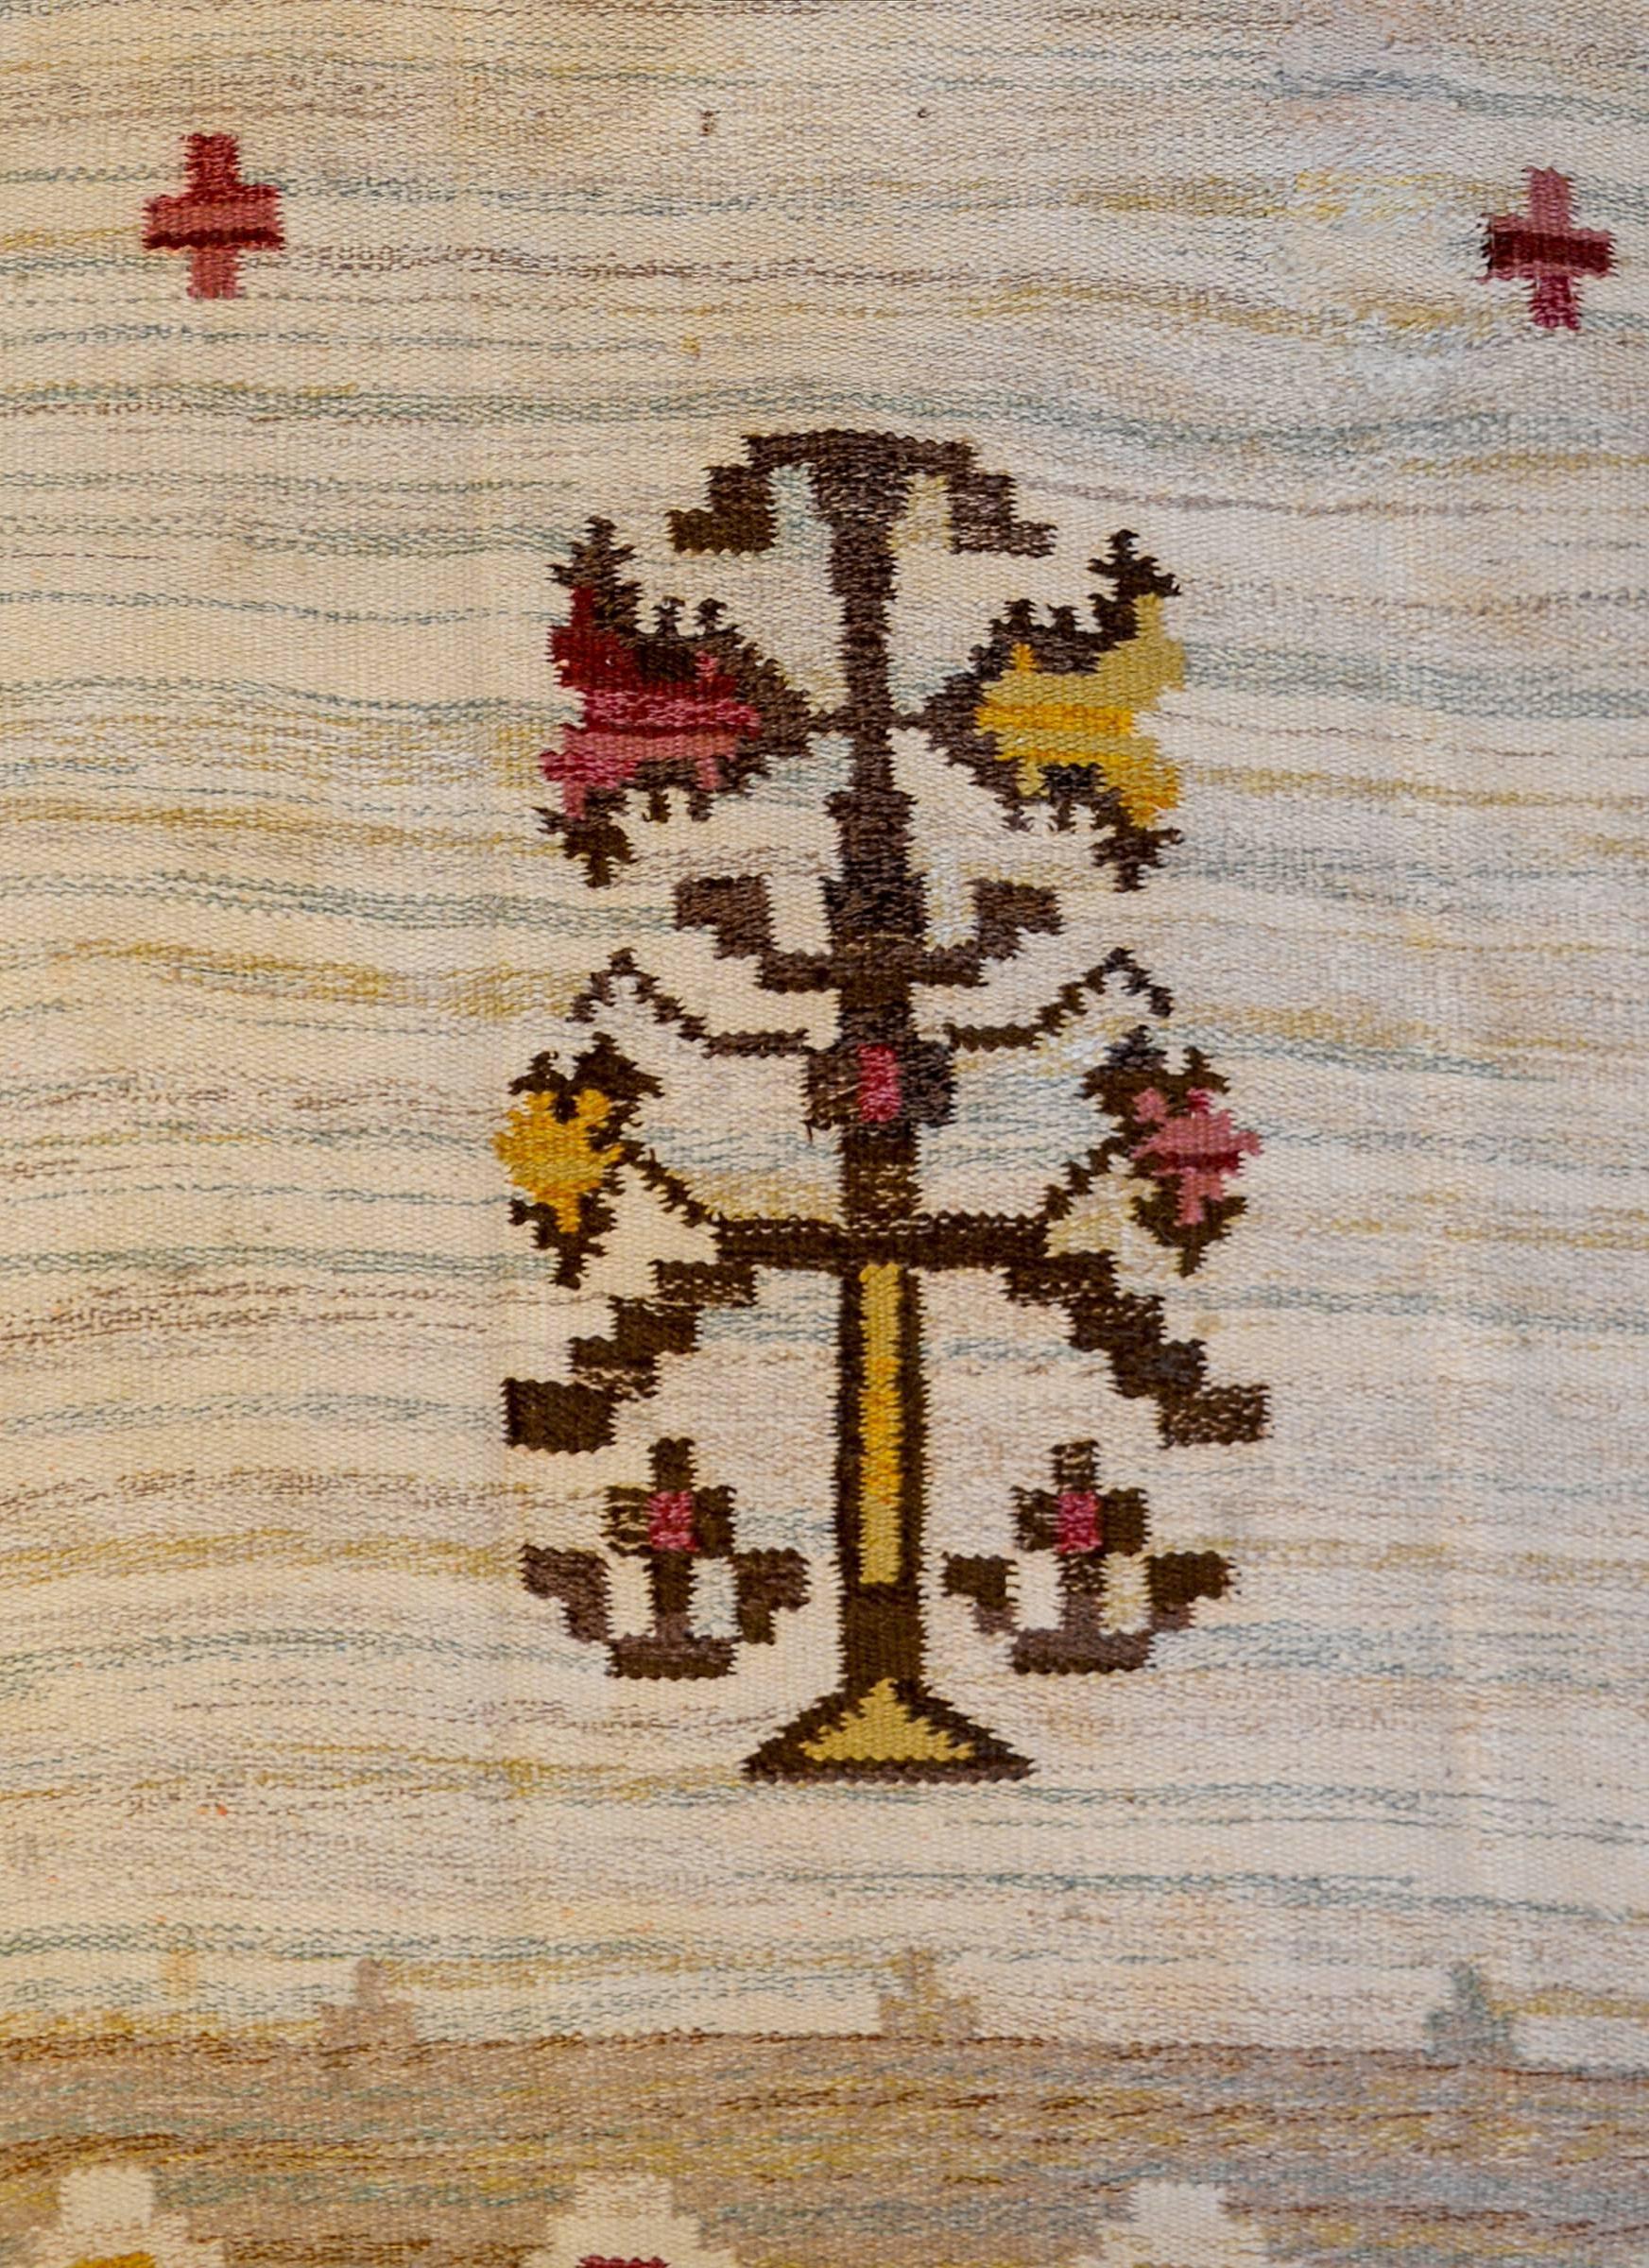 A wonderful vintage Swedish flat-weave Kilim with two mirrored stylized trees-of-life amidst a field of stylized flowers. The border is complementary with repeated diamonds with alternating crimson and gold square centres.